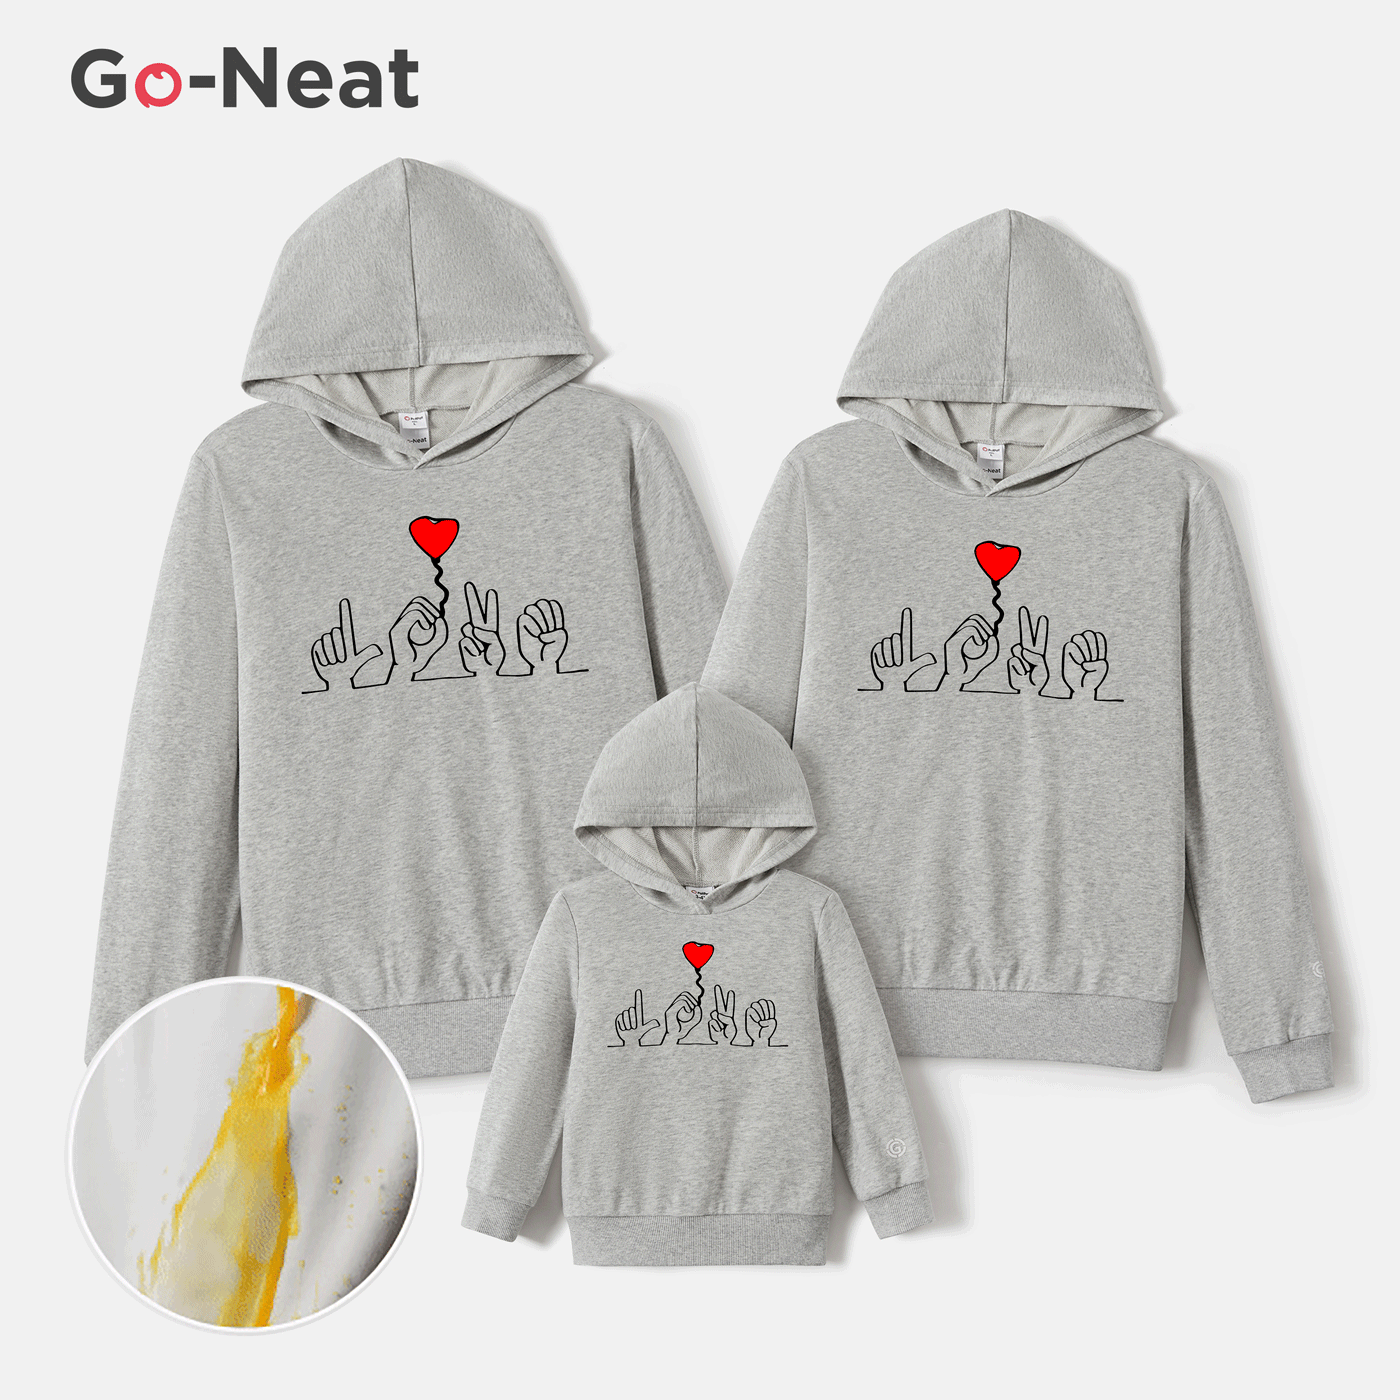 Go-Neat Water Repellent and Stain Family Matching Gesture & Heart Print Grey Long-sleeve Hoodies Light Grey big image 1